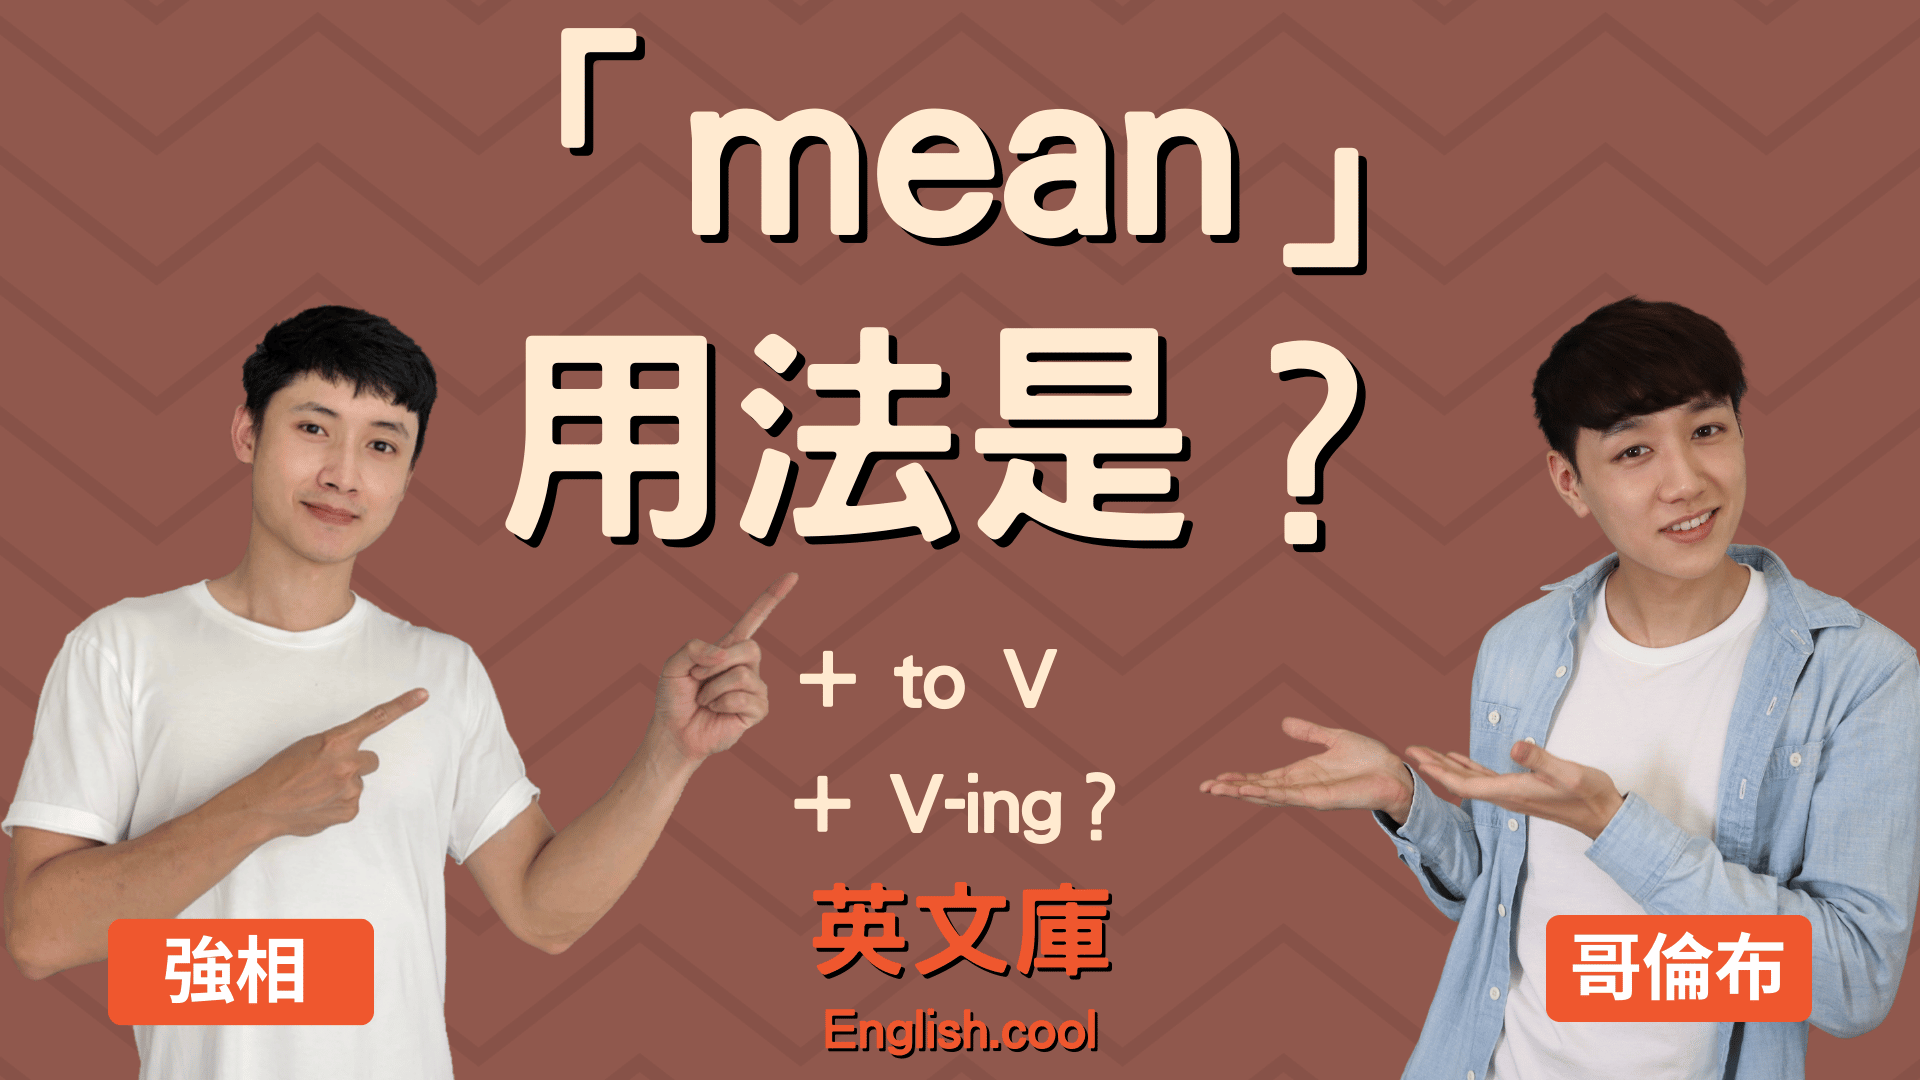 You are currently viewing 「mean」用法是？後面接 to V 還是 V-ing？